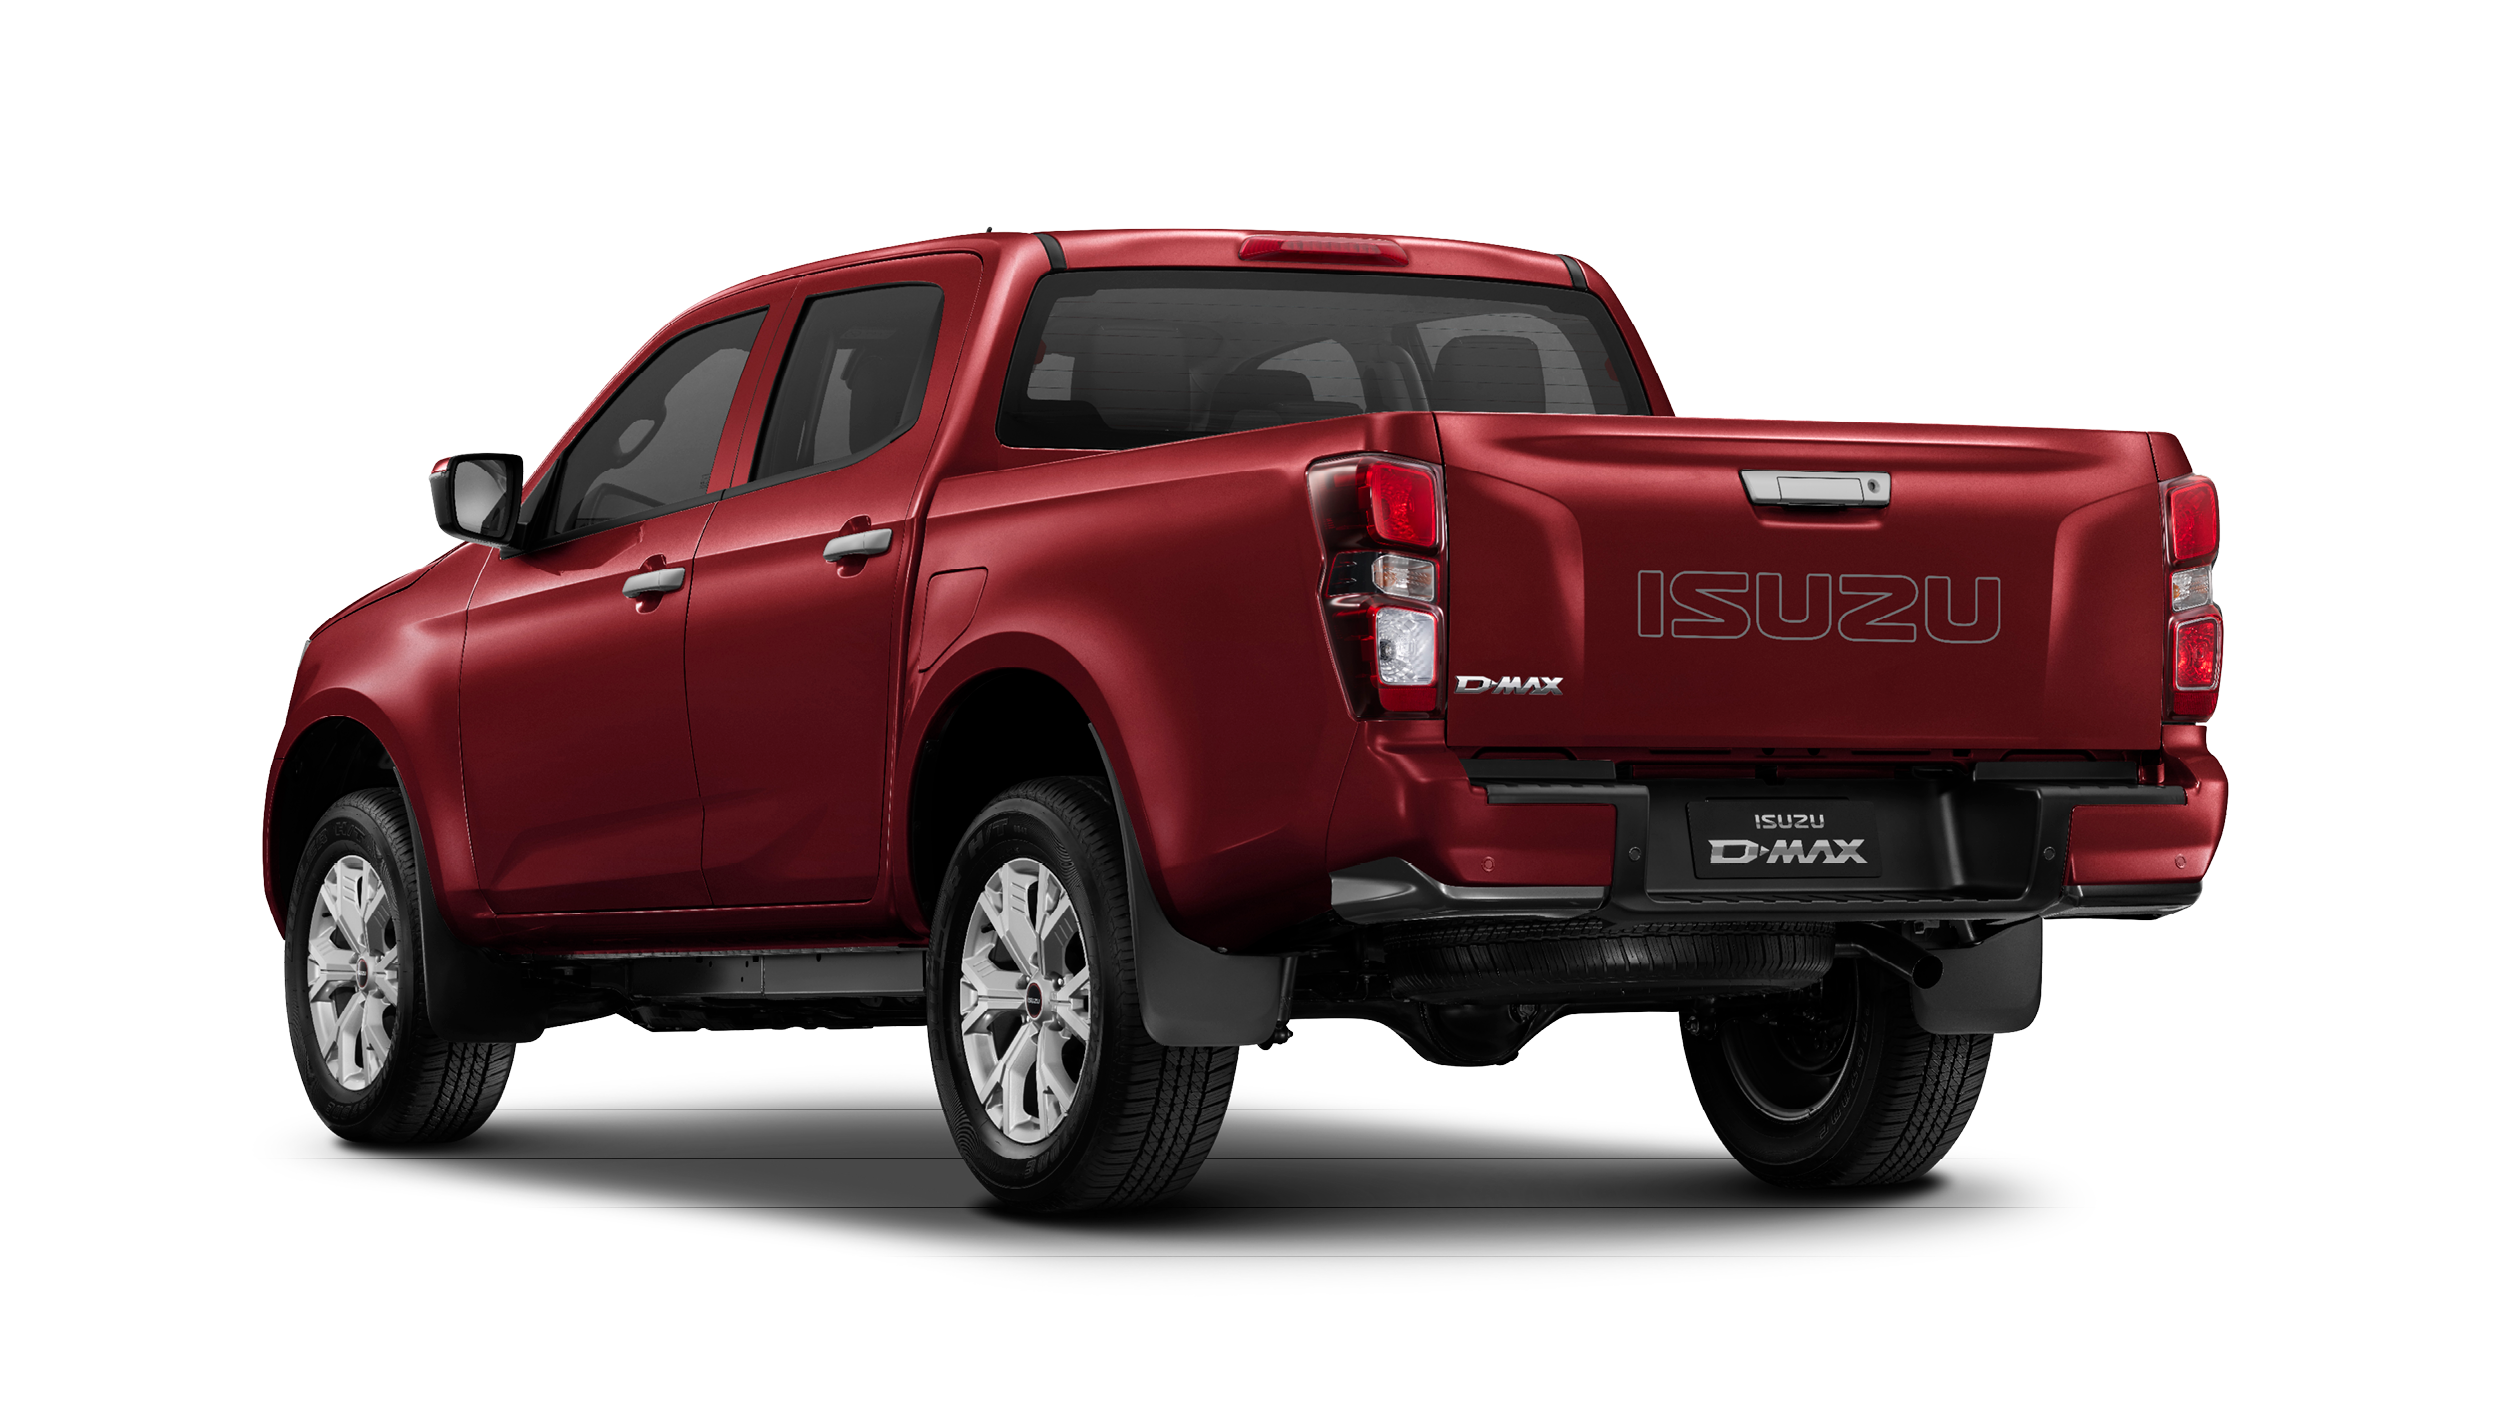 Isuzu D-Max DL20 Extended Cab Spinel Red rear